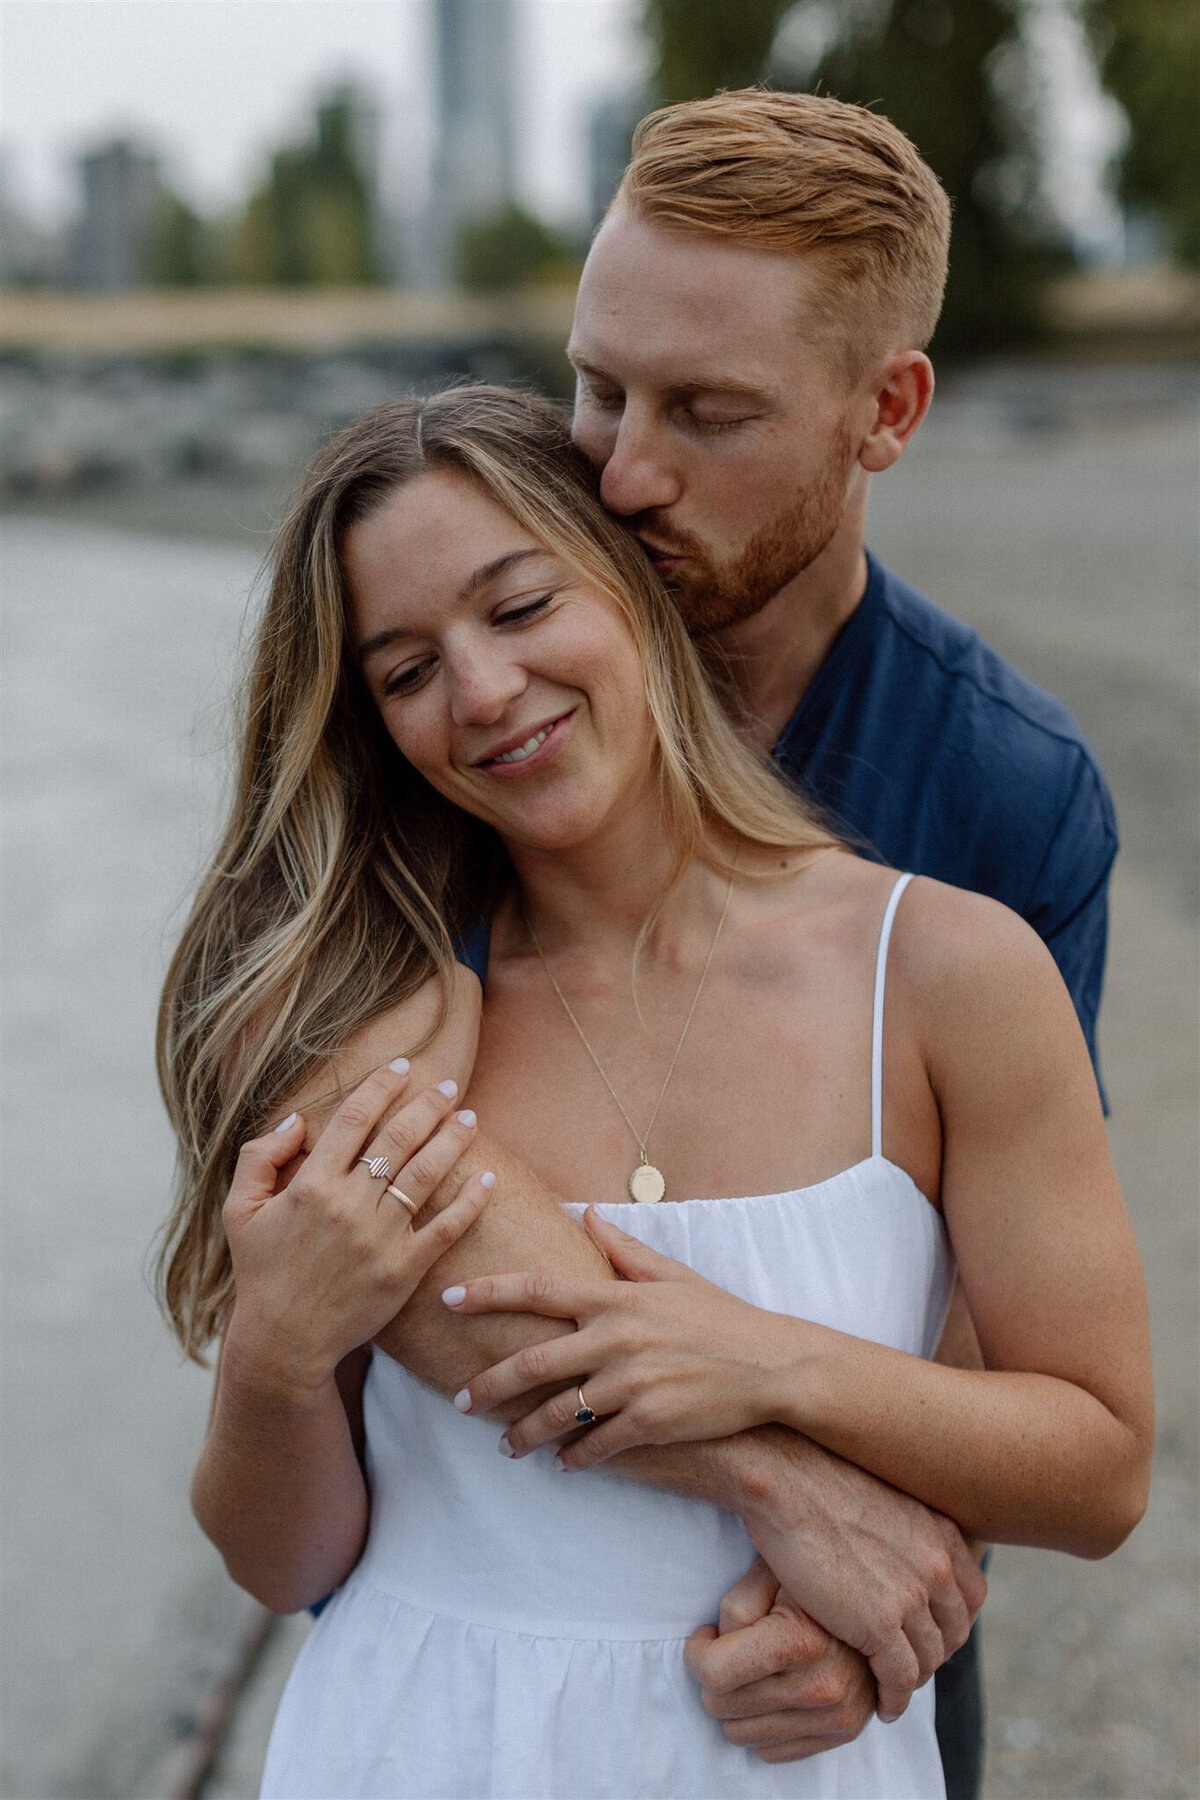 Gorgeous engagement portrait, captured by Bronte Taylor Photography, a Vancouver-based photographer with a playful, genuine and intimate approach.